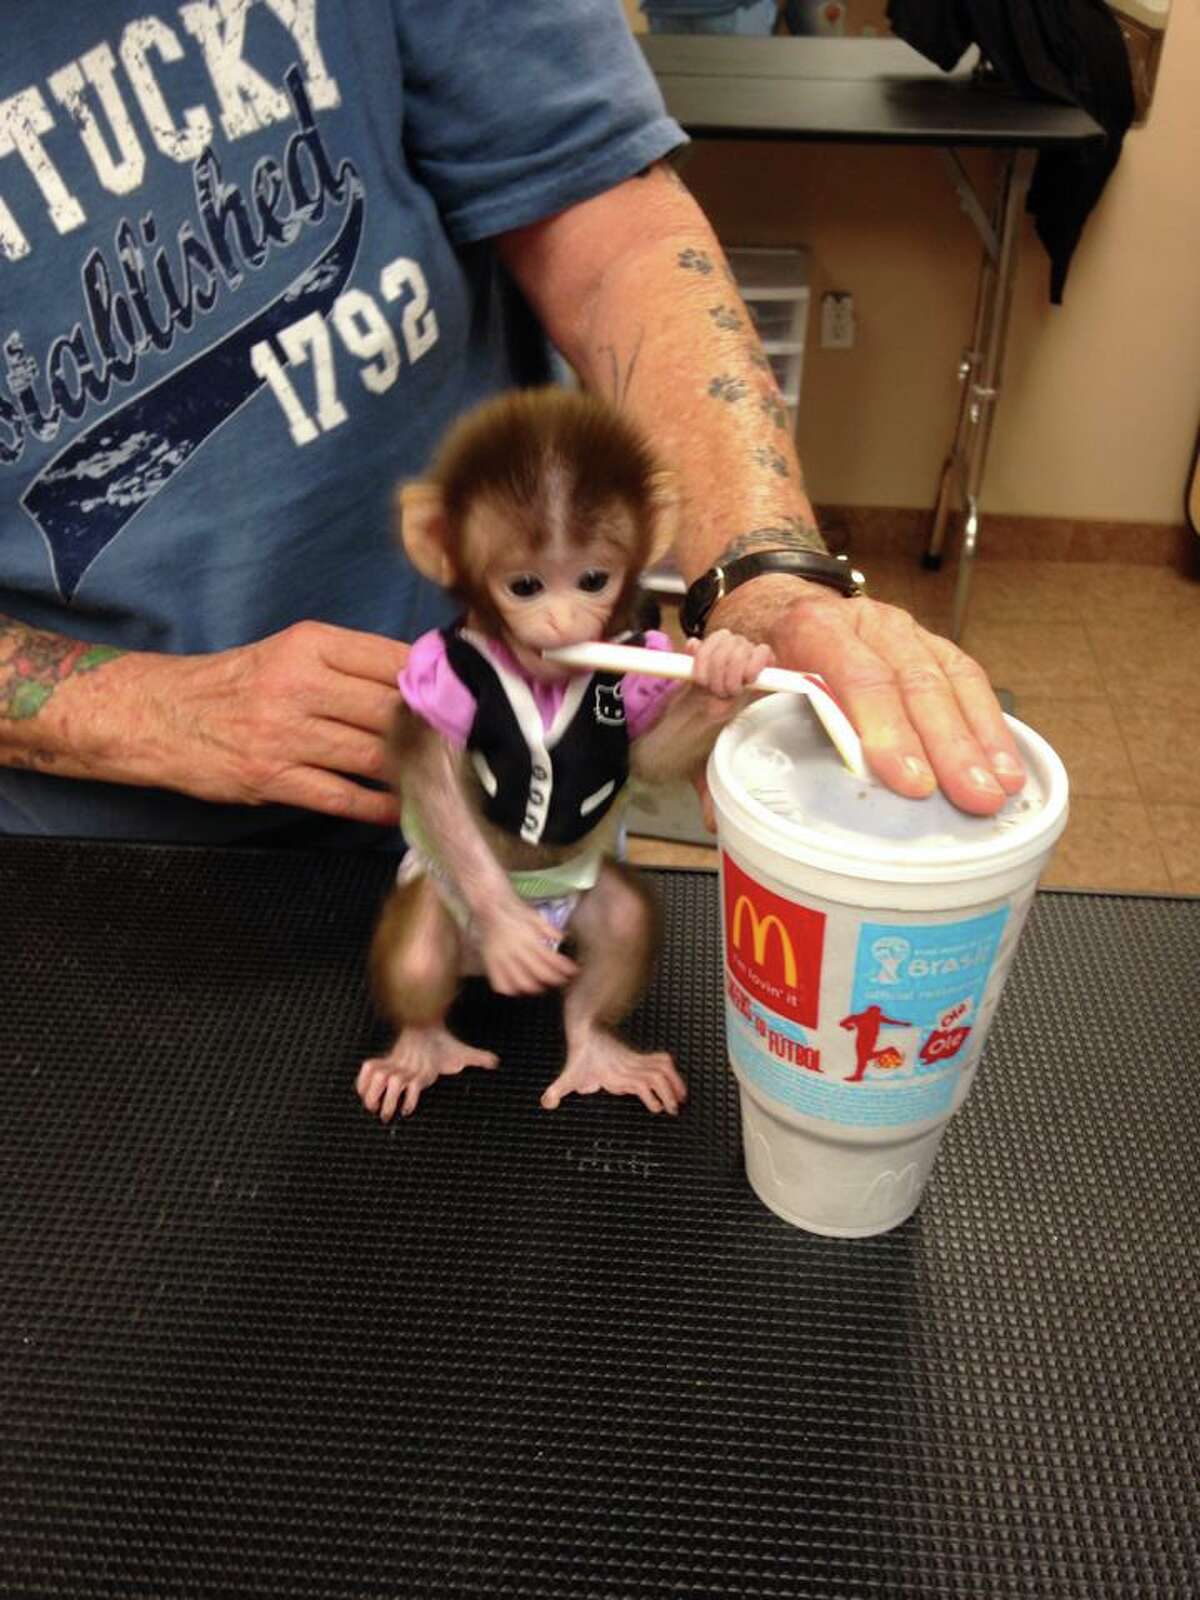 Bubbles was bought by Shontelle Porter as a pet at two weeks old from a breeder in McAllen. The now two month old Rhesus monkey is fast becoming an online sensation with over 13,000 fans on her Facebook page following her every move.